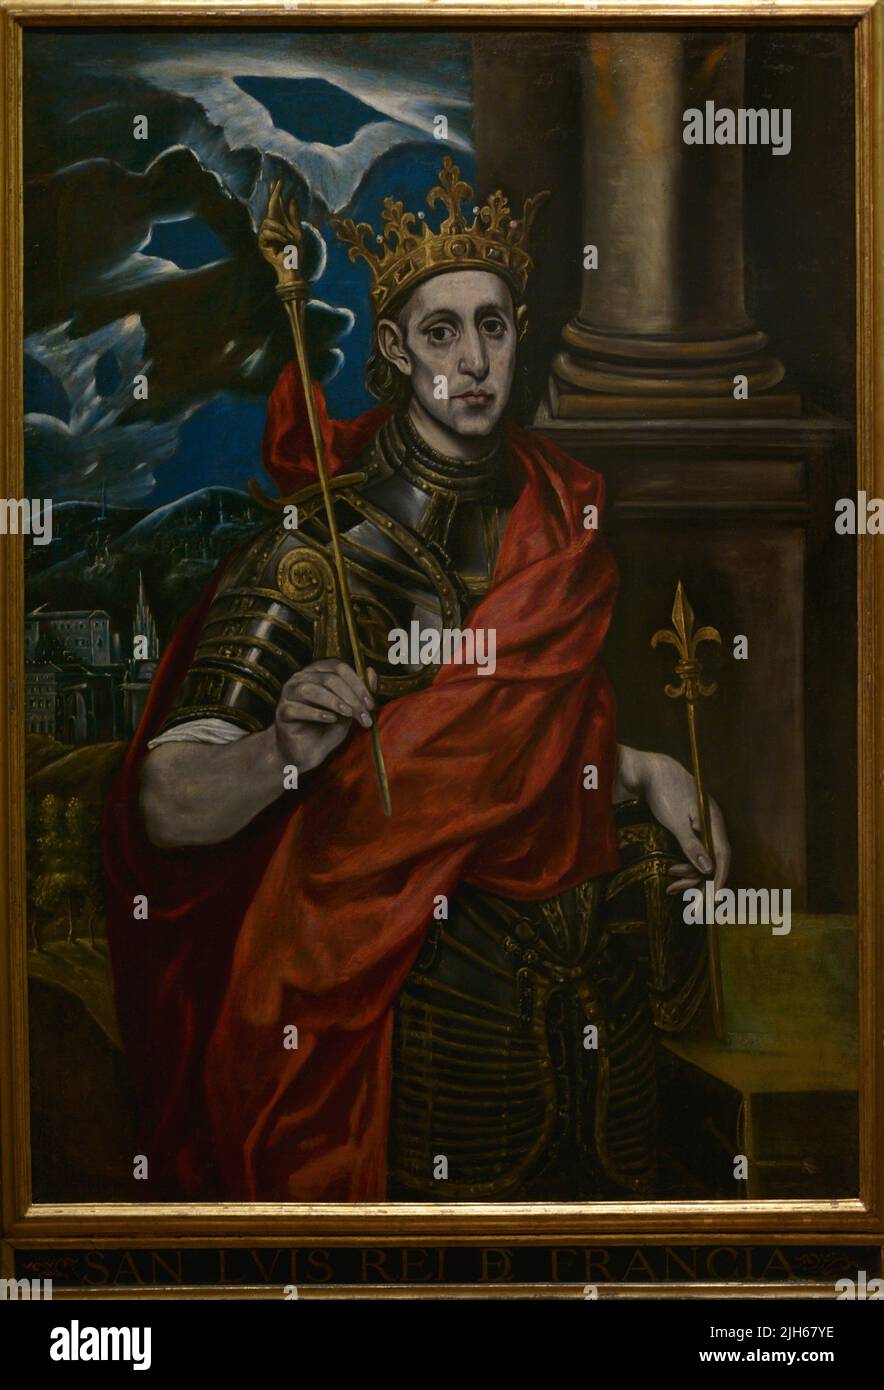 Louis IX or Saint Louis (1214-1270). King of France (1226-1270). Portrait depicting the king as a Modern Age general, painted by the Workshop of El Greco, circa 1615-1630. Oil on canvas (128 x 90 cm). El Greco Museum. Toledo, Spain. Stock Photo